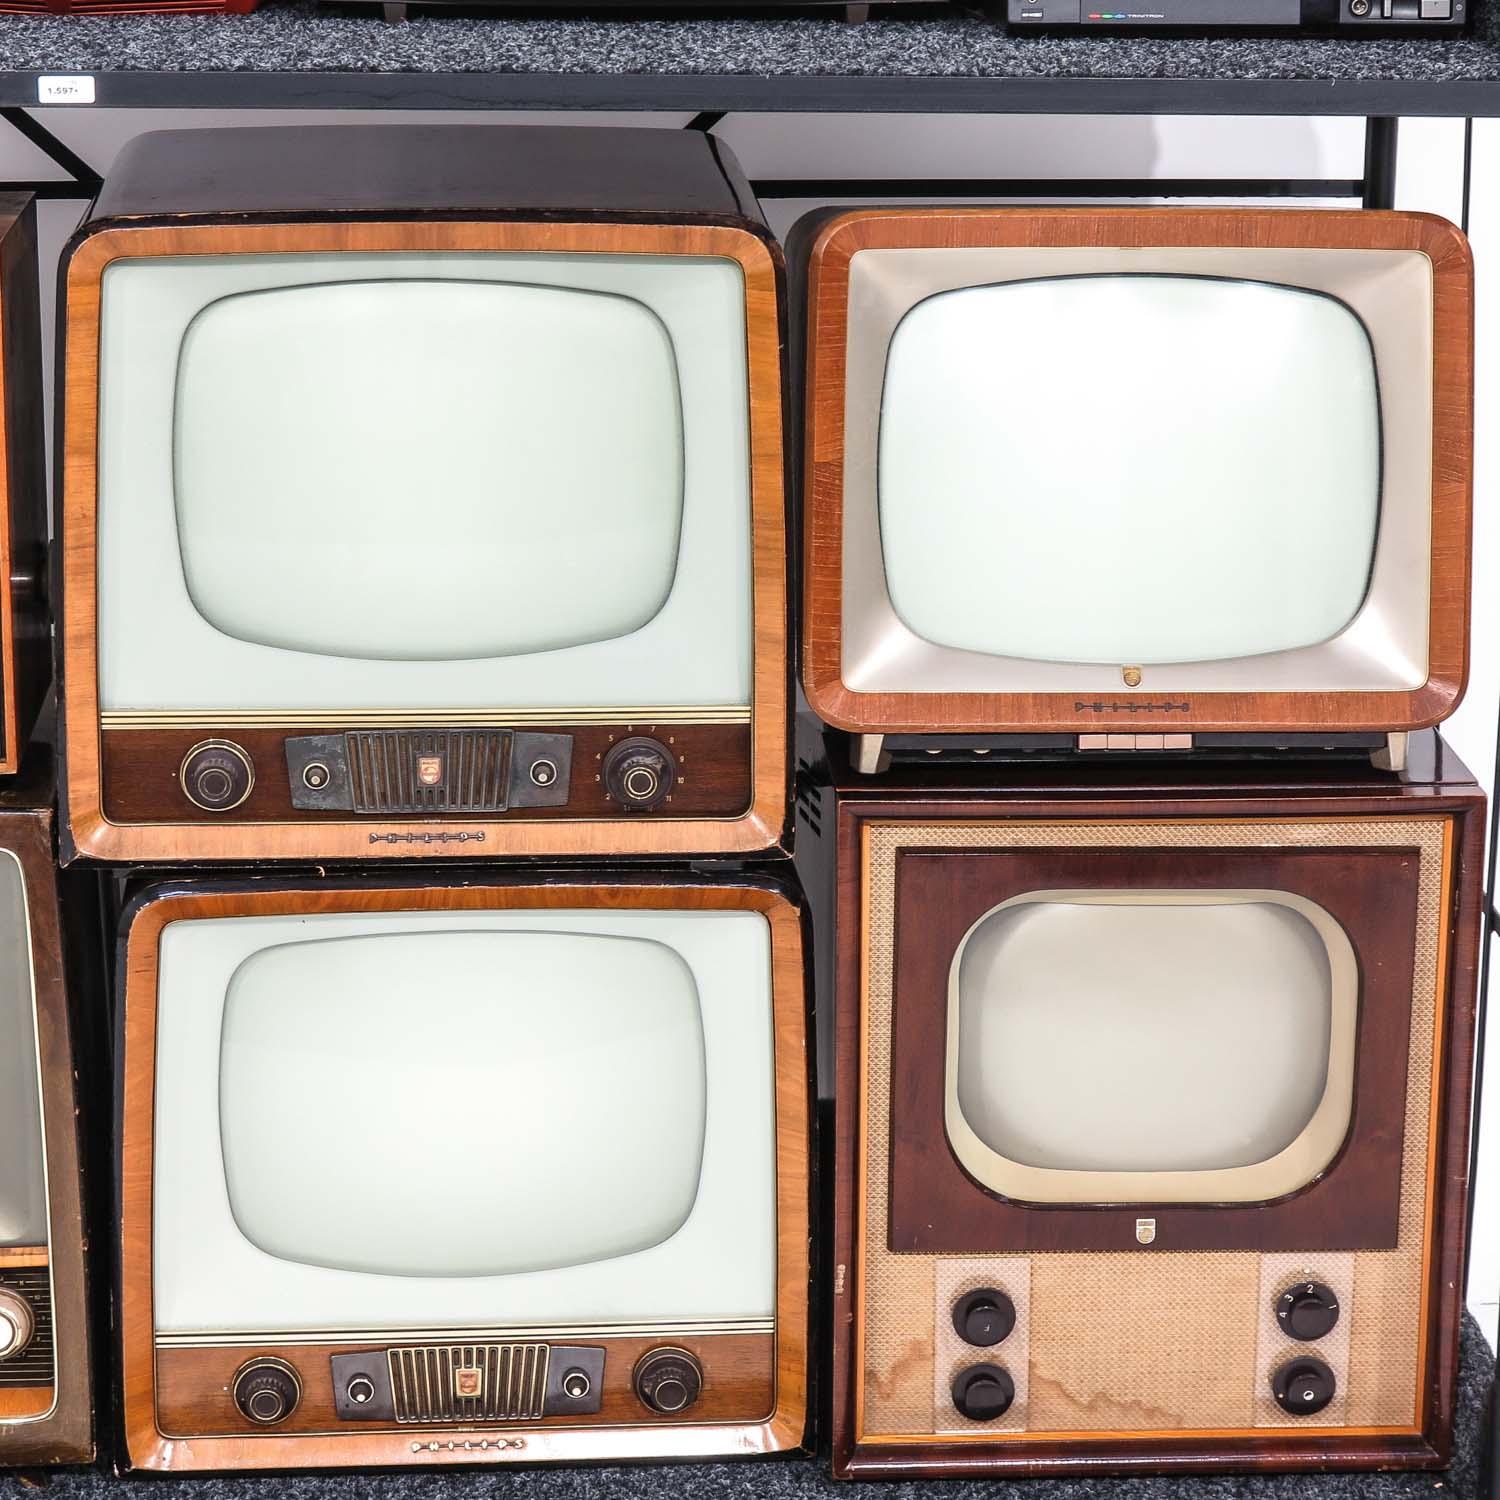 A Collection of 13 Vintage Televisions - Image 4 of 6